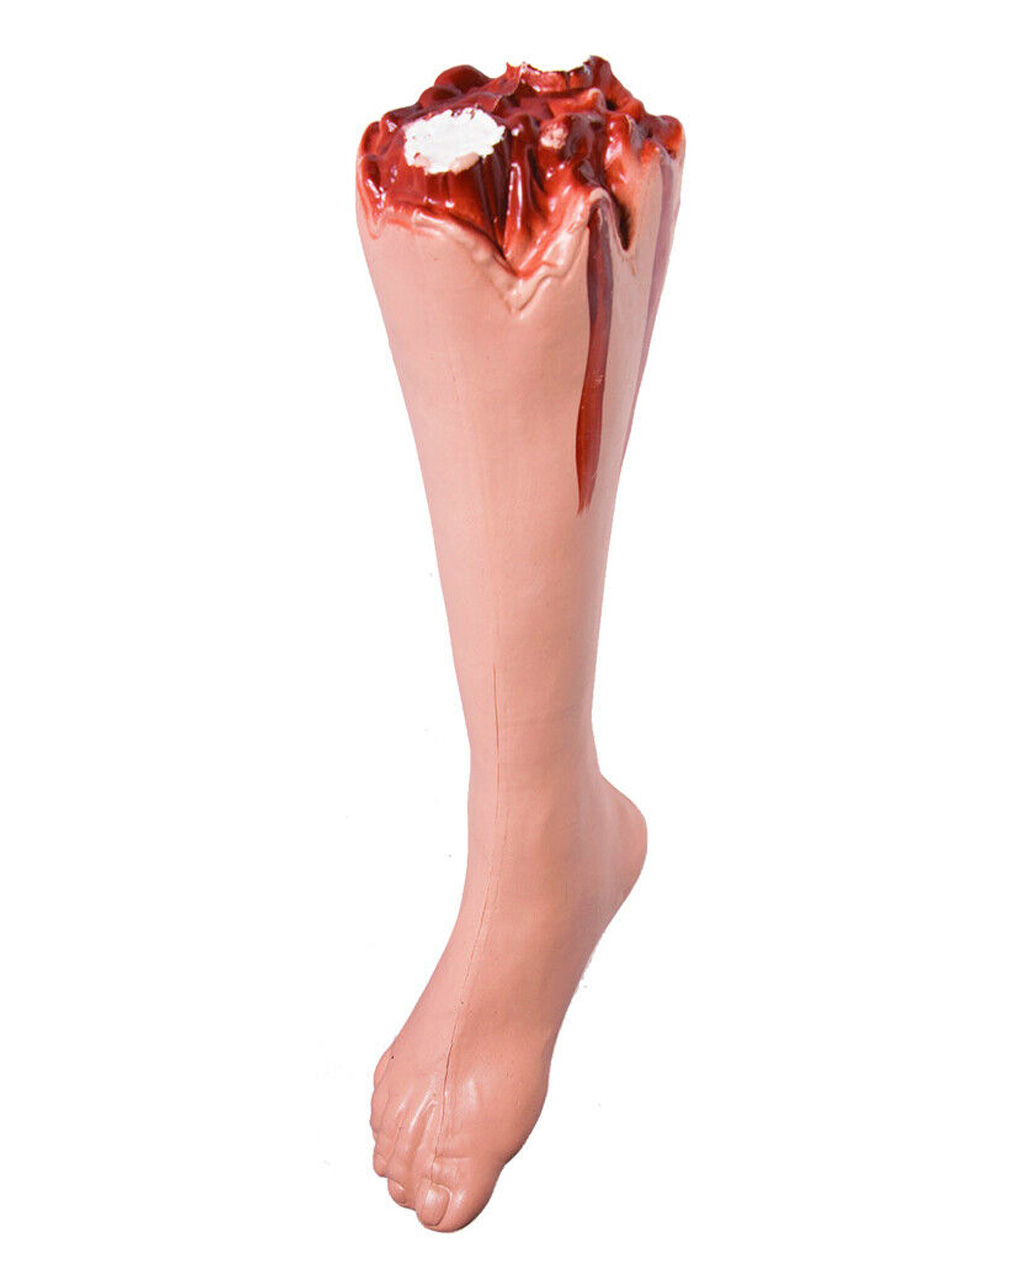 HALLOWEEN LIFE SIZE SEVERED BODY PARTS PROP BLOODY FAKE LEG FOOT PROP 